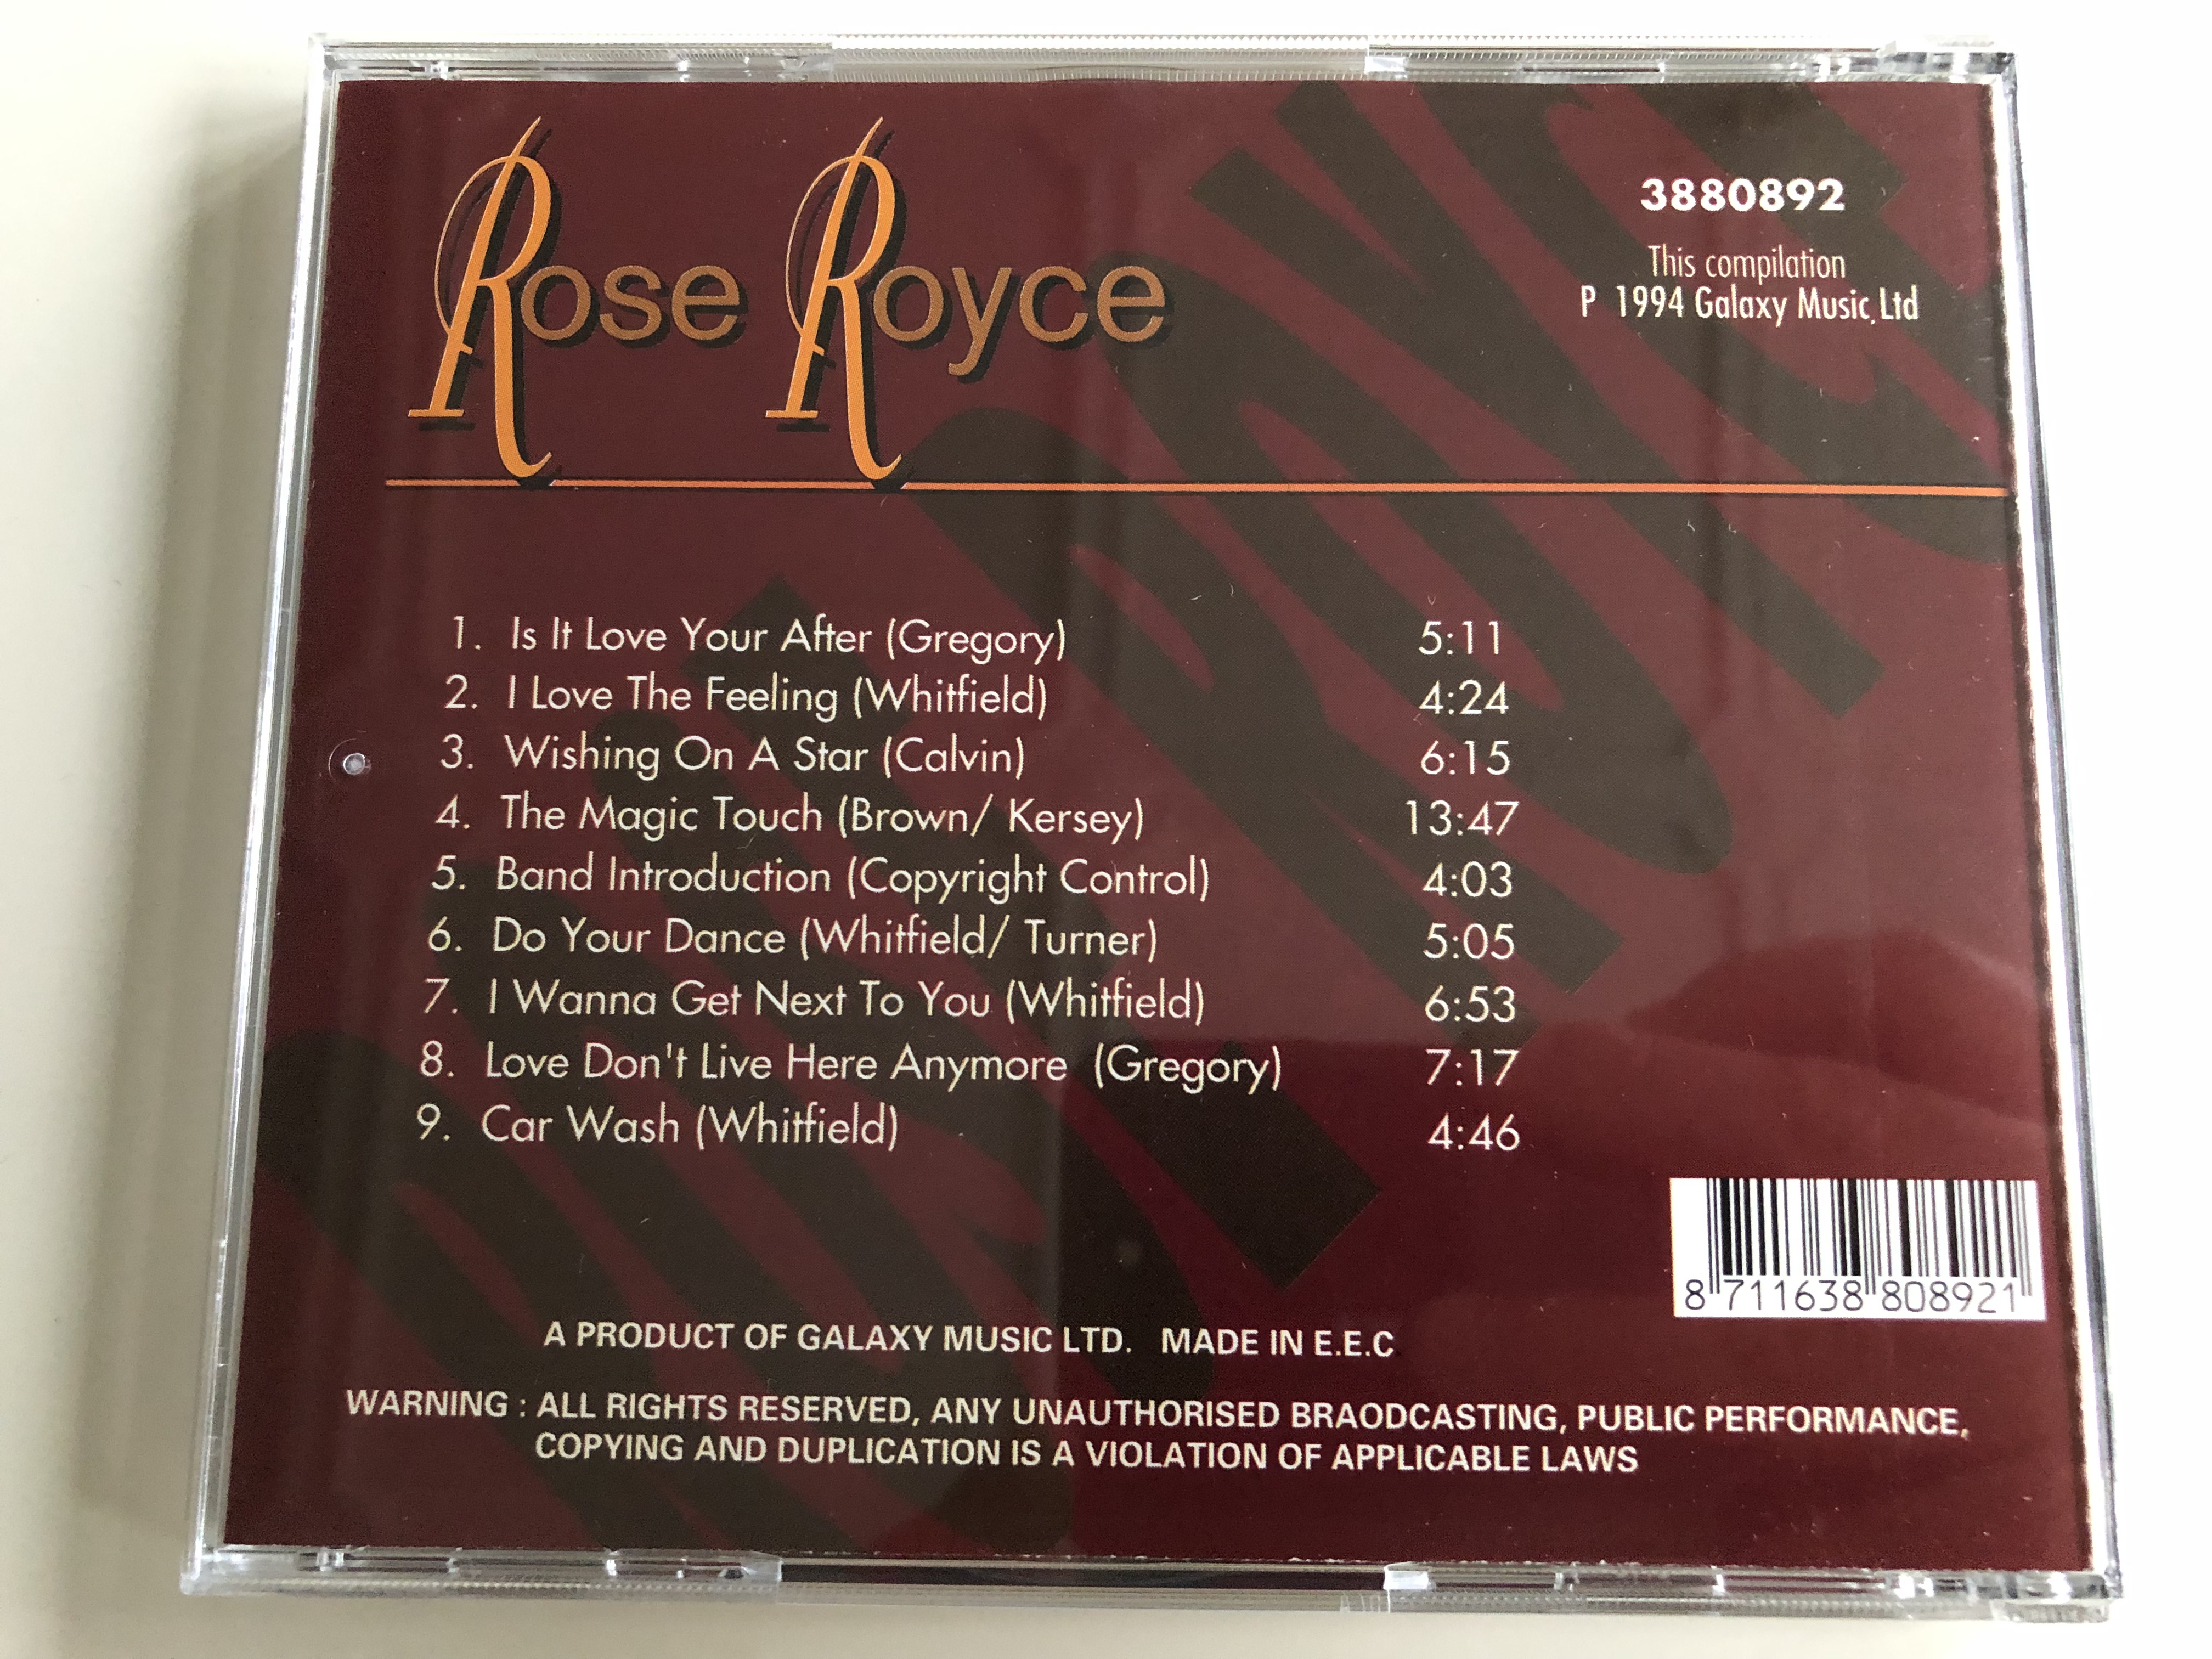 rose-royce-greatest-hits-live-audio-cd-1994-is-it-love-you-re-after-wishing-on-a-star-i-wanna-get-next-to-you-love-don-t-live-here-anymore-car-wash-the-starlight-collection-4-.jpg